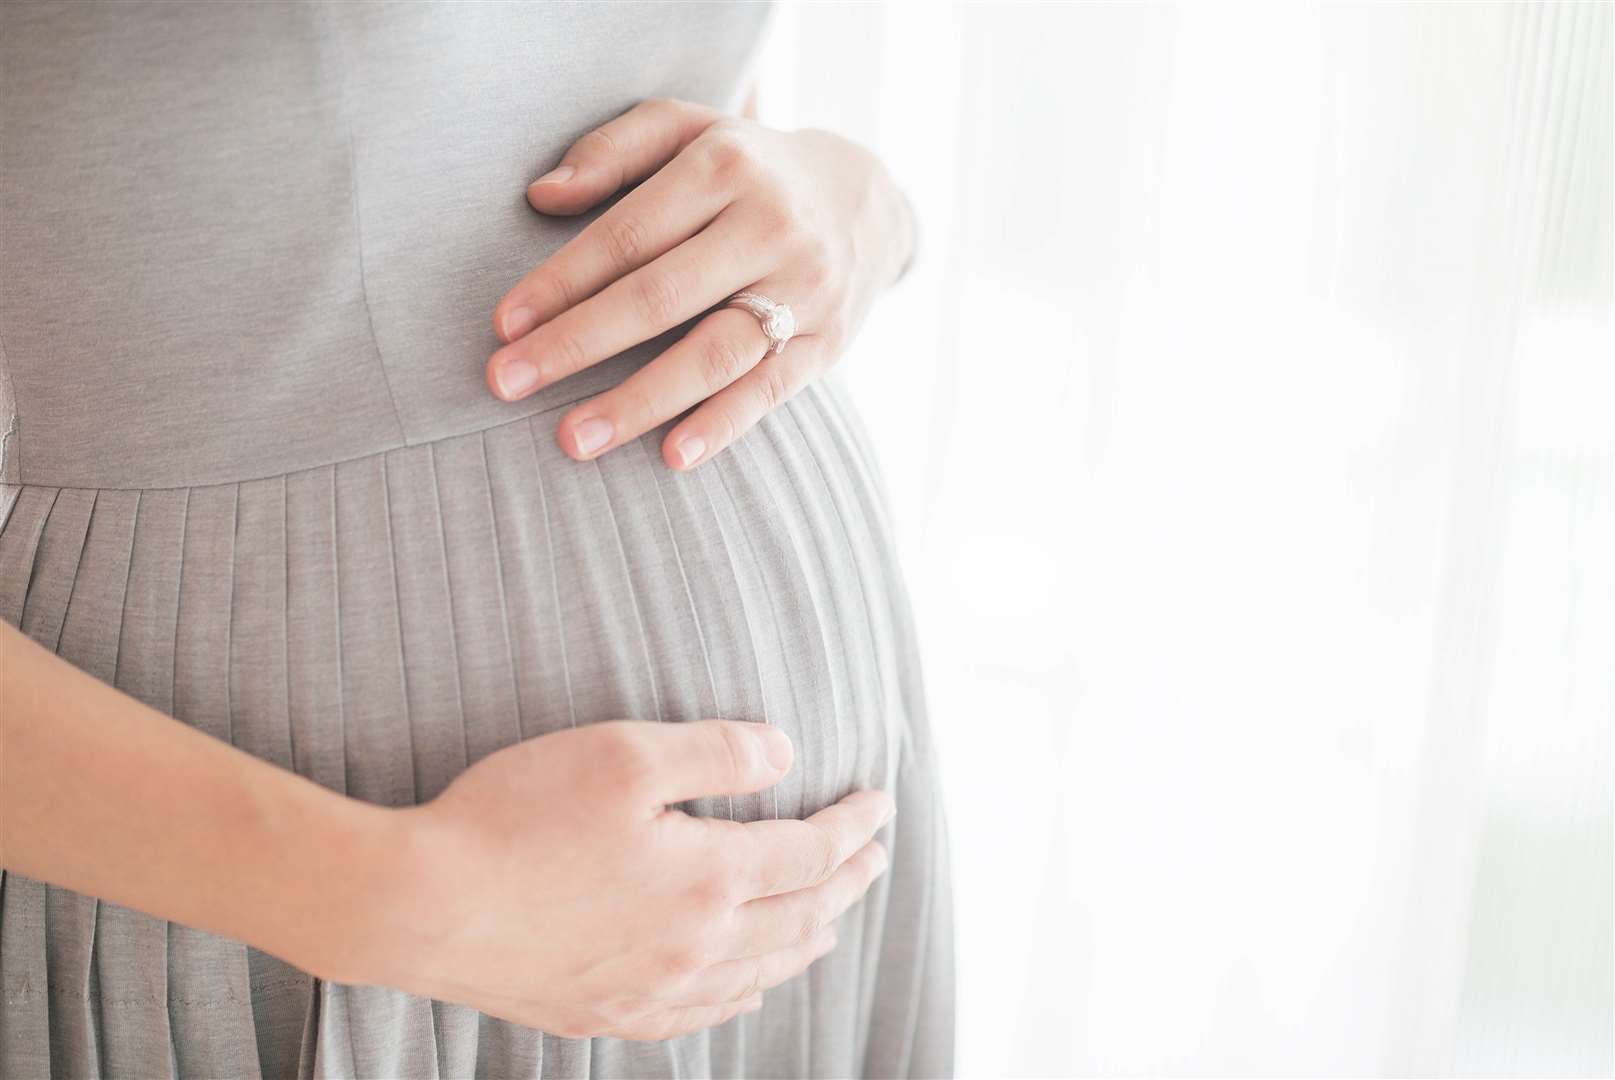 Pregnant women are among those entitled to free medicine. Image: iStock.